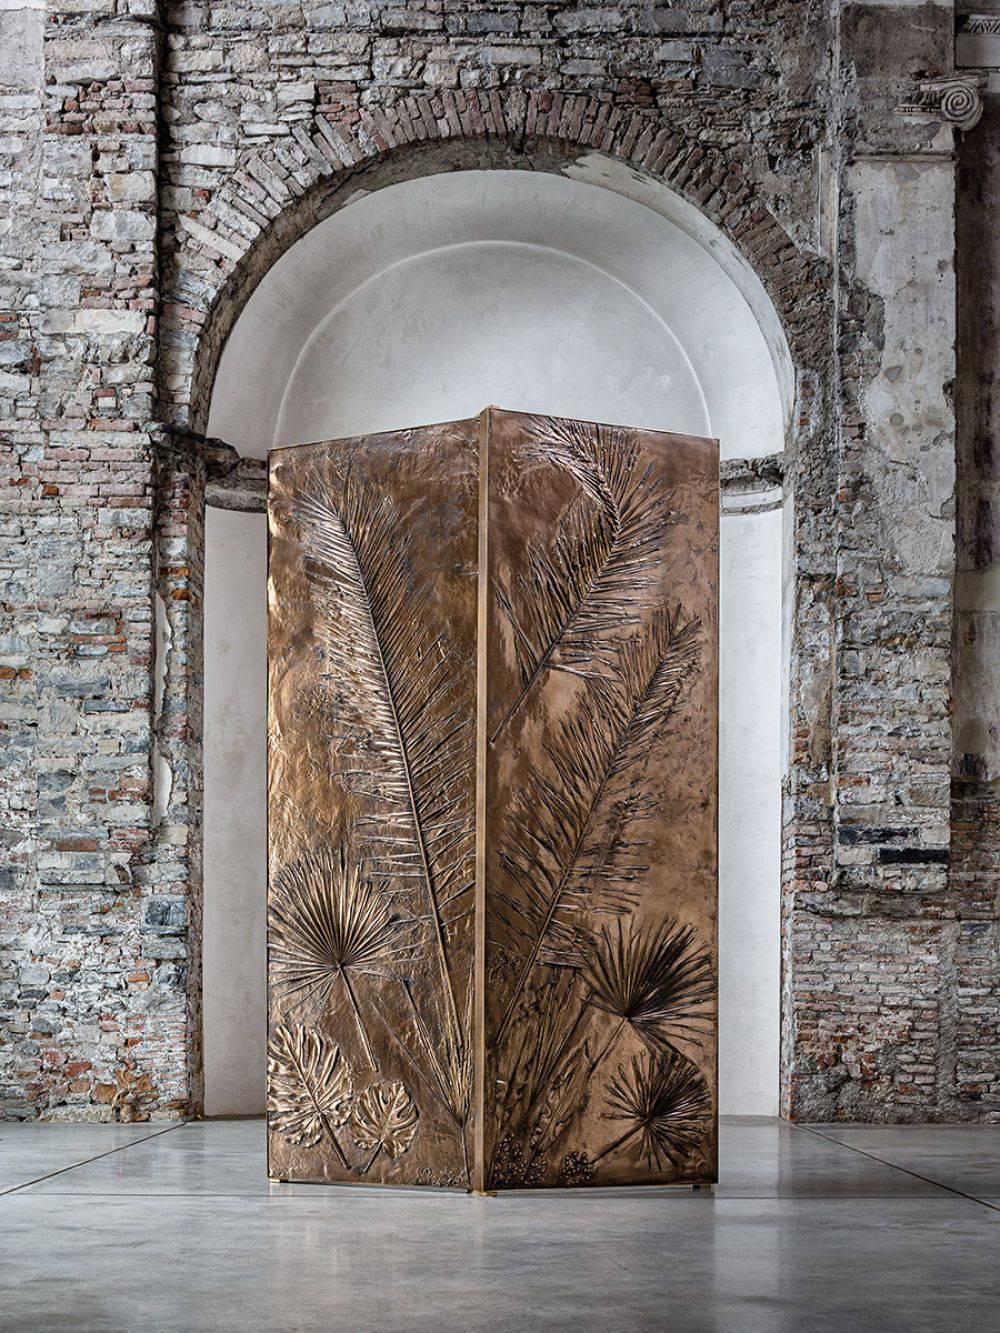 These monumental bronze panels are handcrafted using painstaking techniques at the Milan-based studio of Gianluca Pacchioni. Although part of the Tropical Fossil series, each panel features unique bas-relief elements formed from leaves and plants